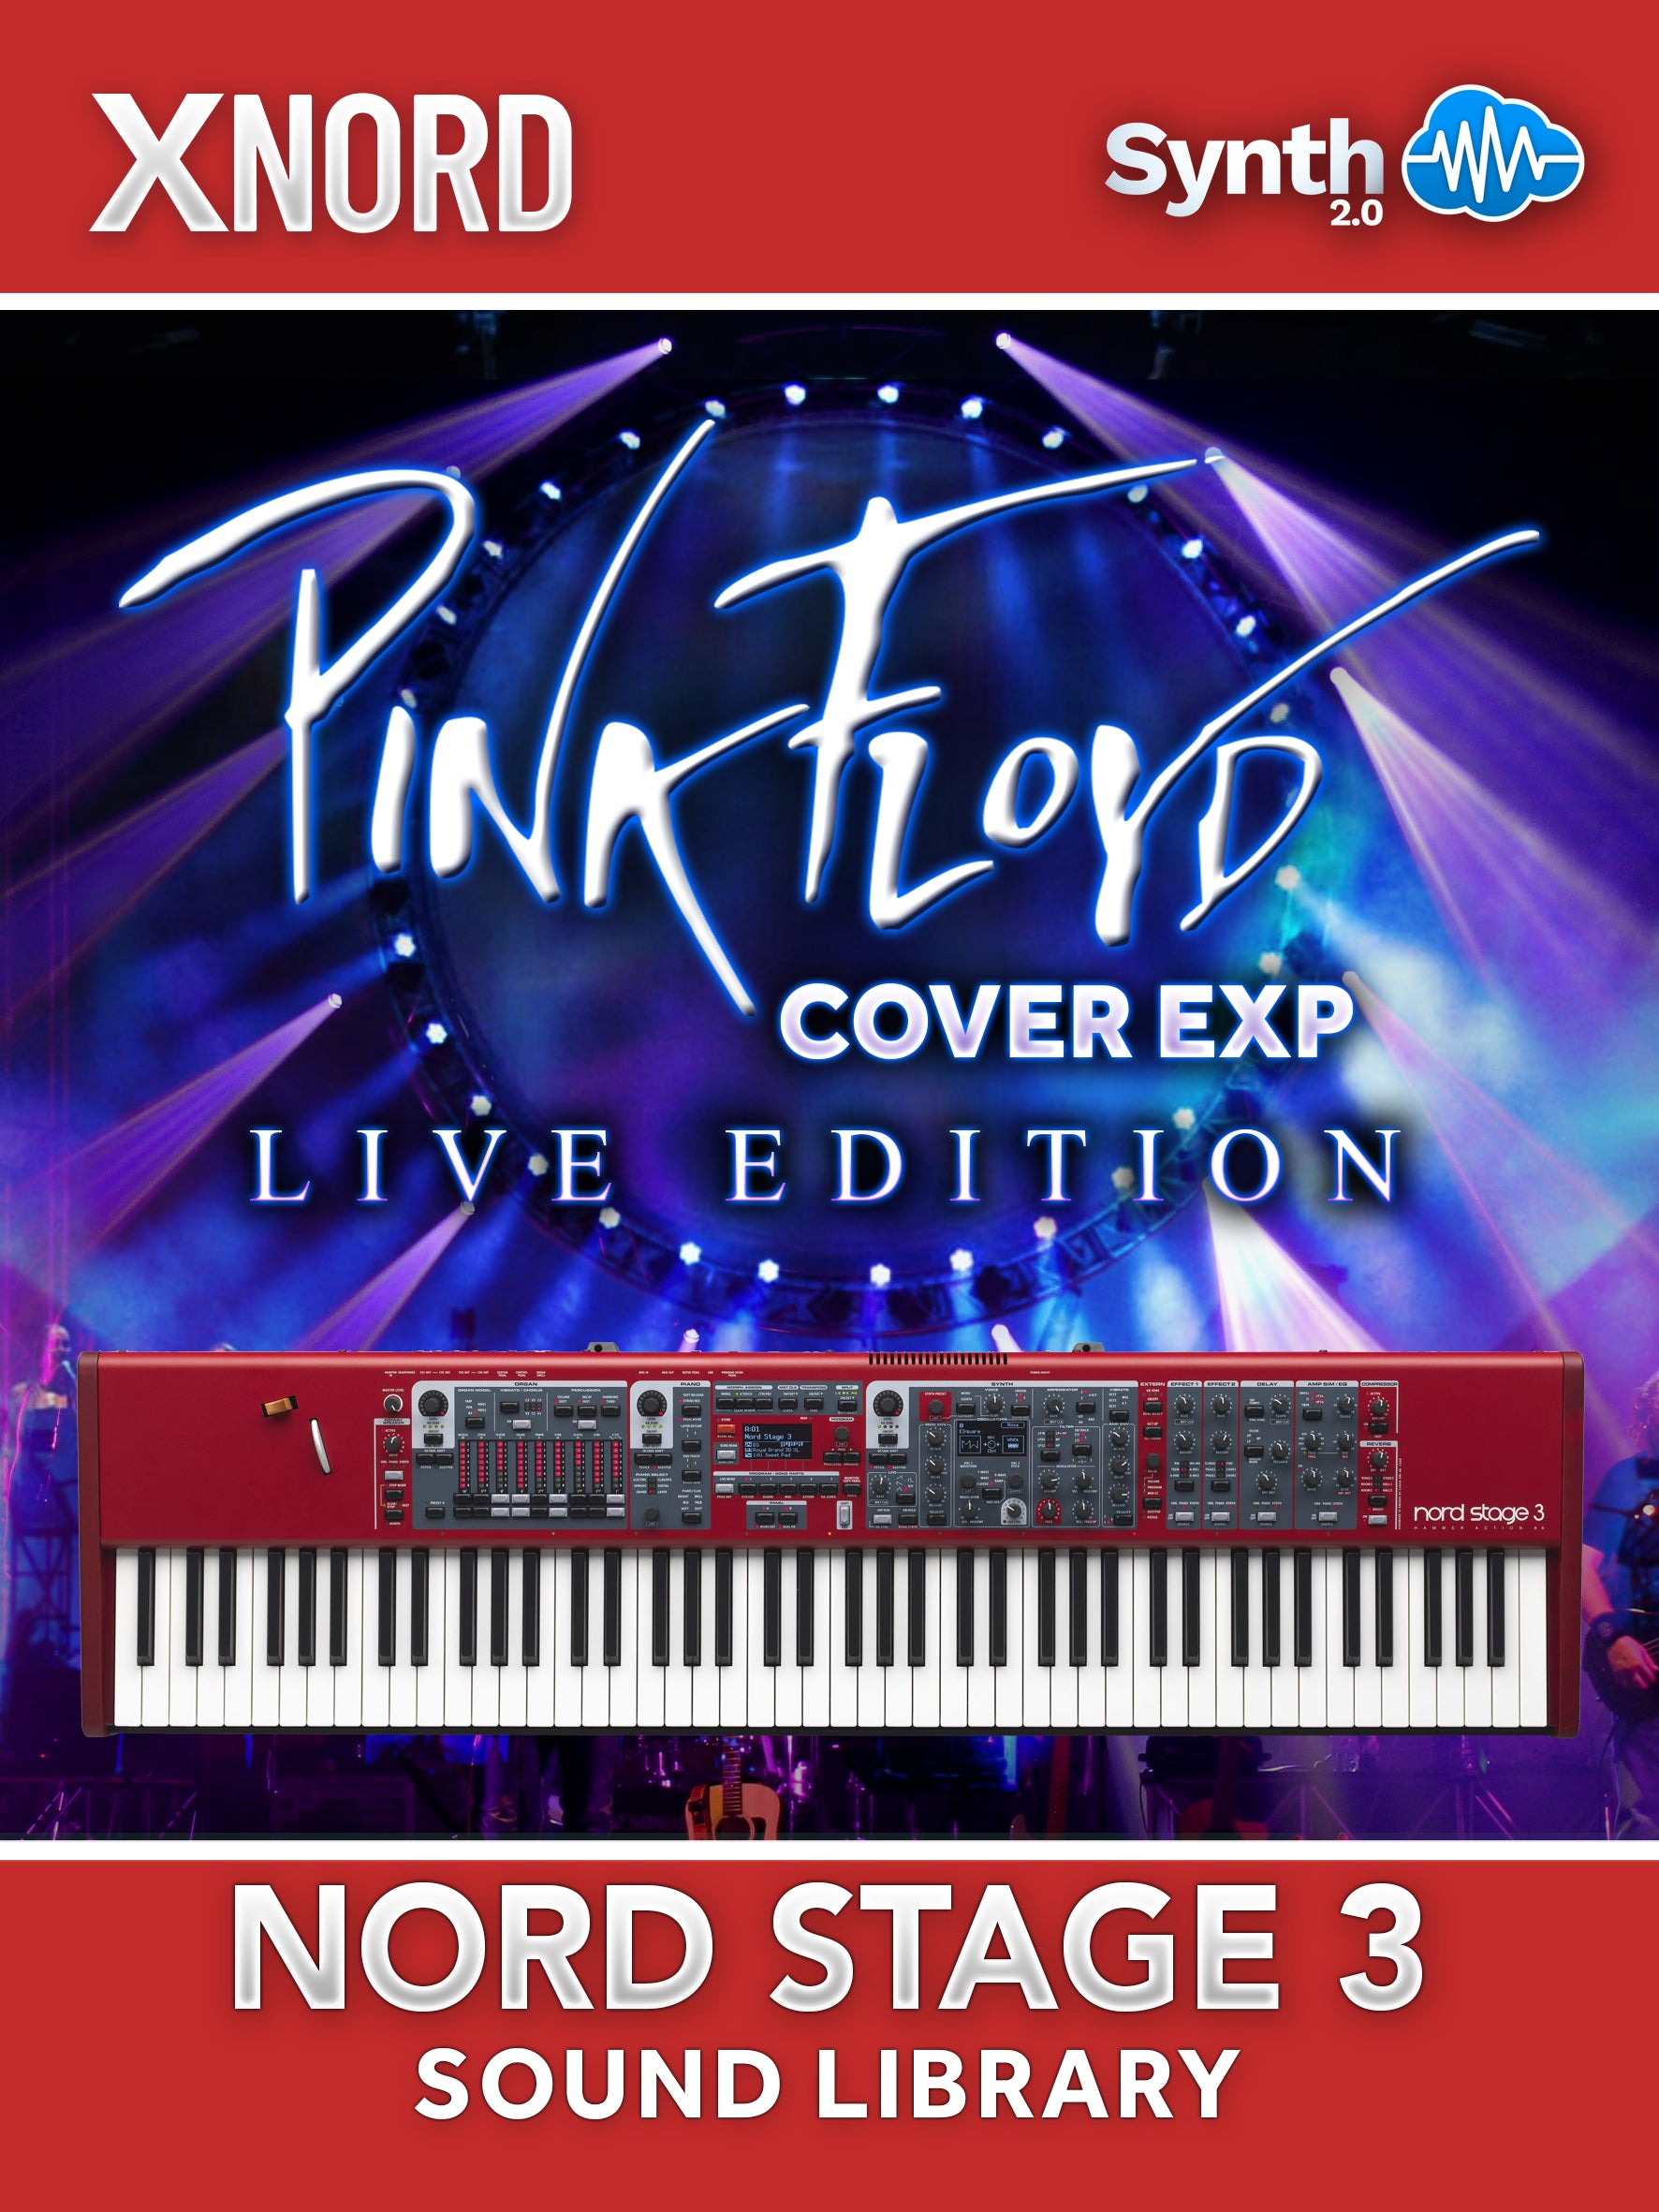 FPL013 - ( Bundle ) - PF Cover EXP Live Edition + T9T9 Cover EXP - Nord Stage 3